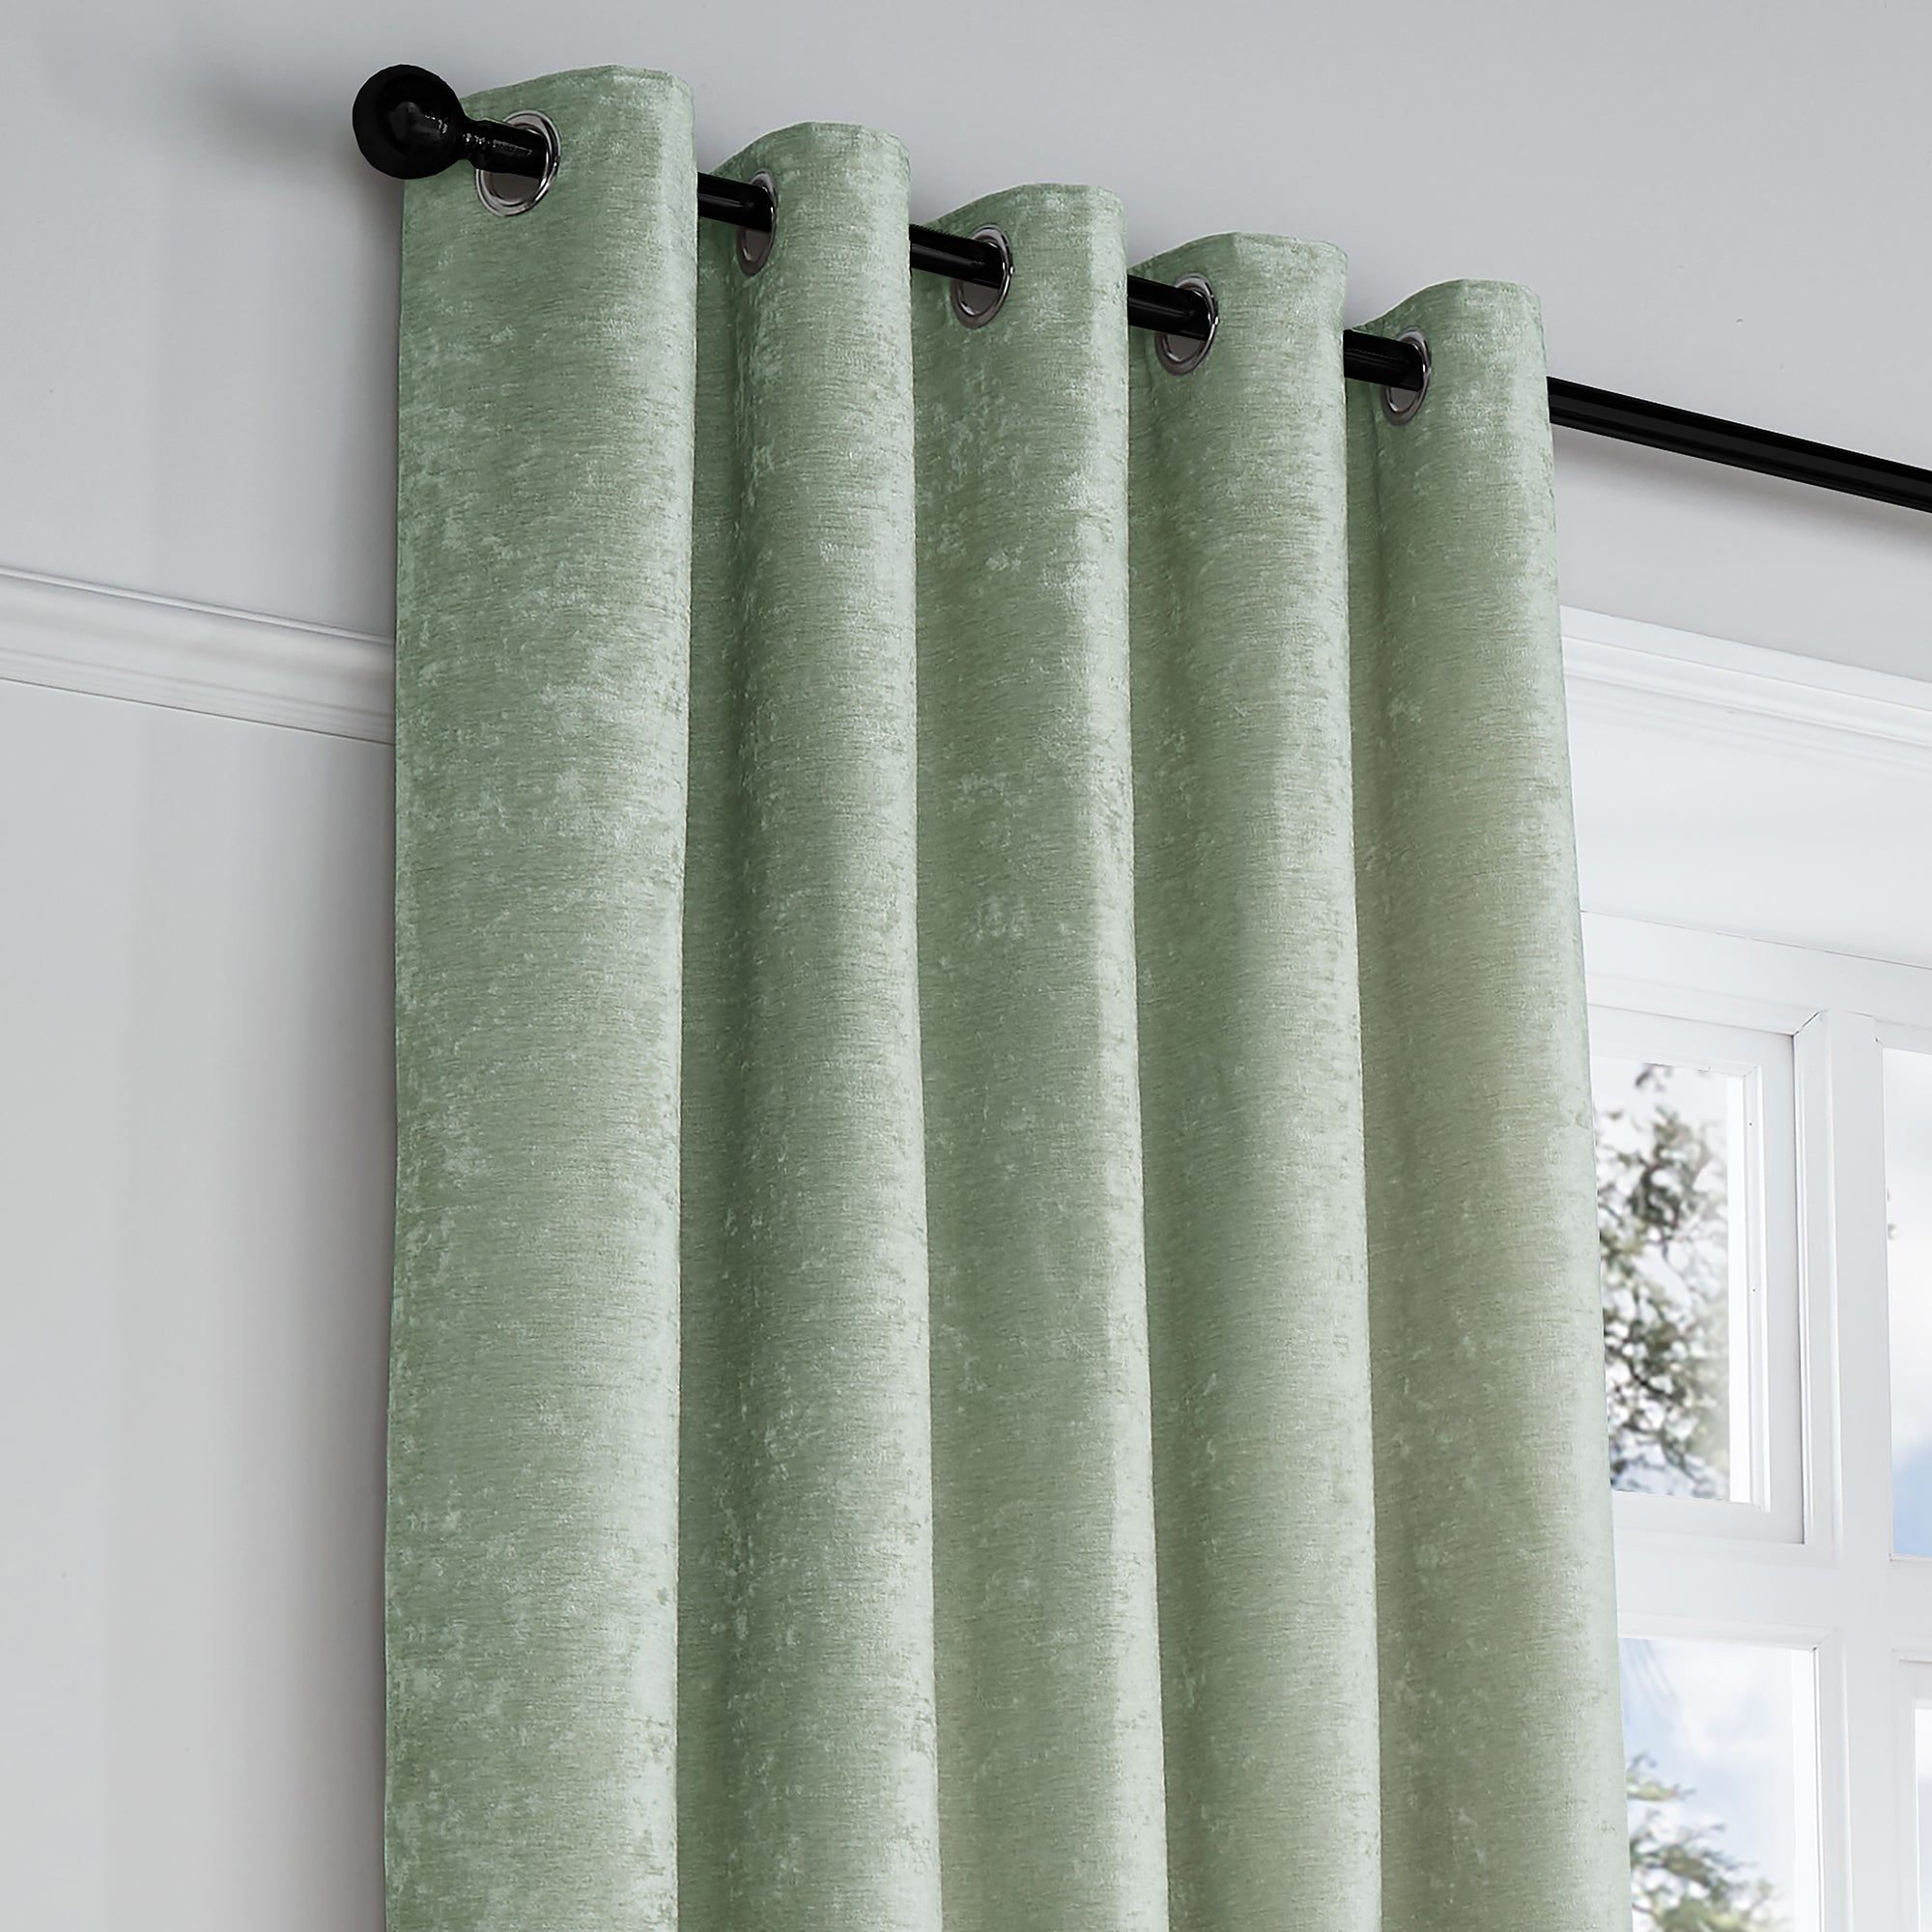 Pair of Eyelet Curtains Textured Chenille by Curtina in Green